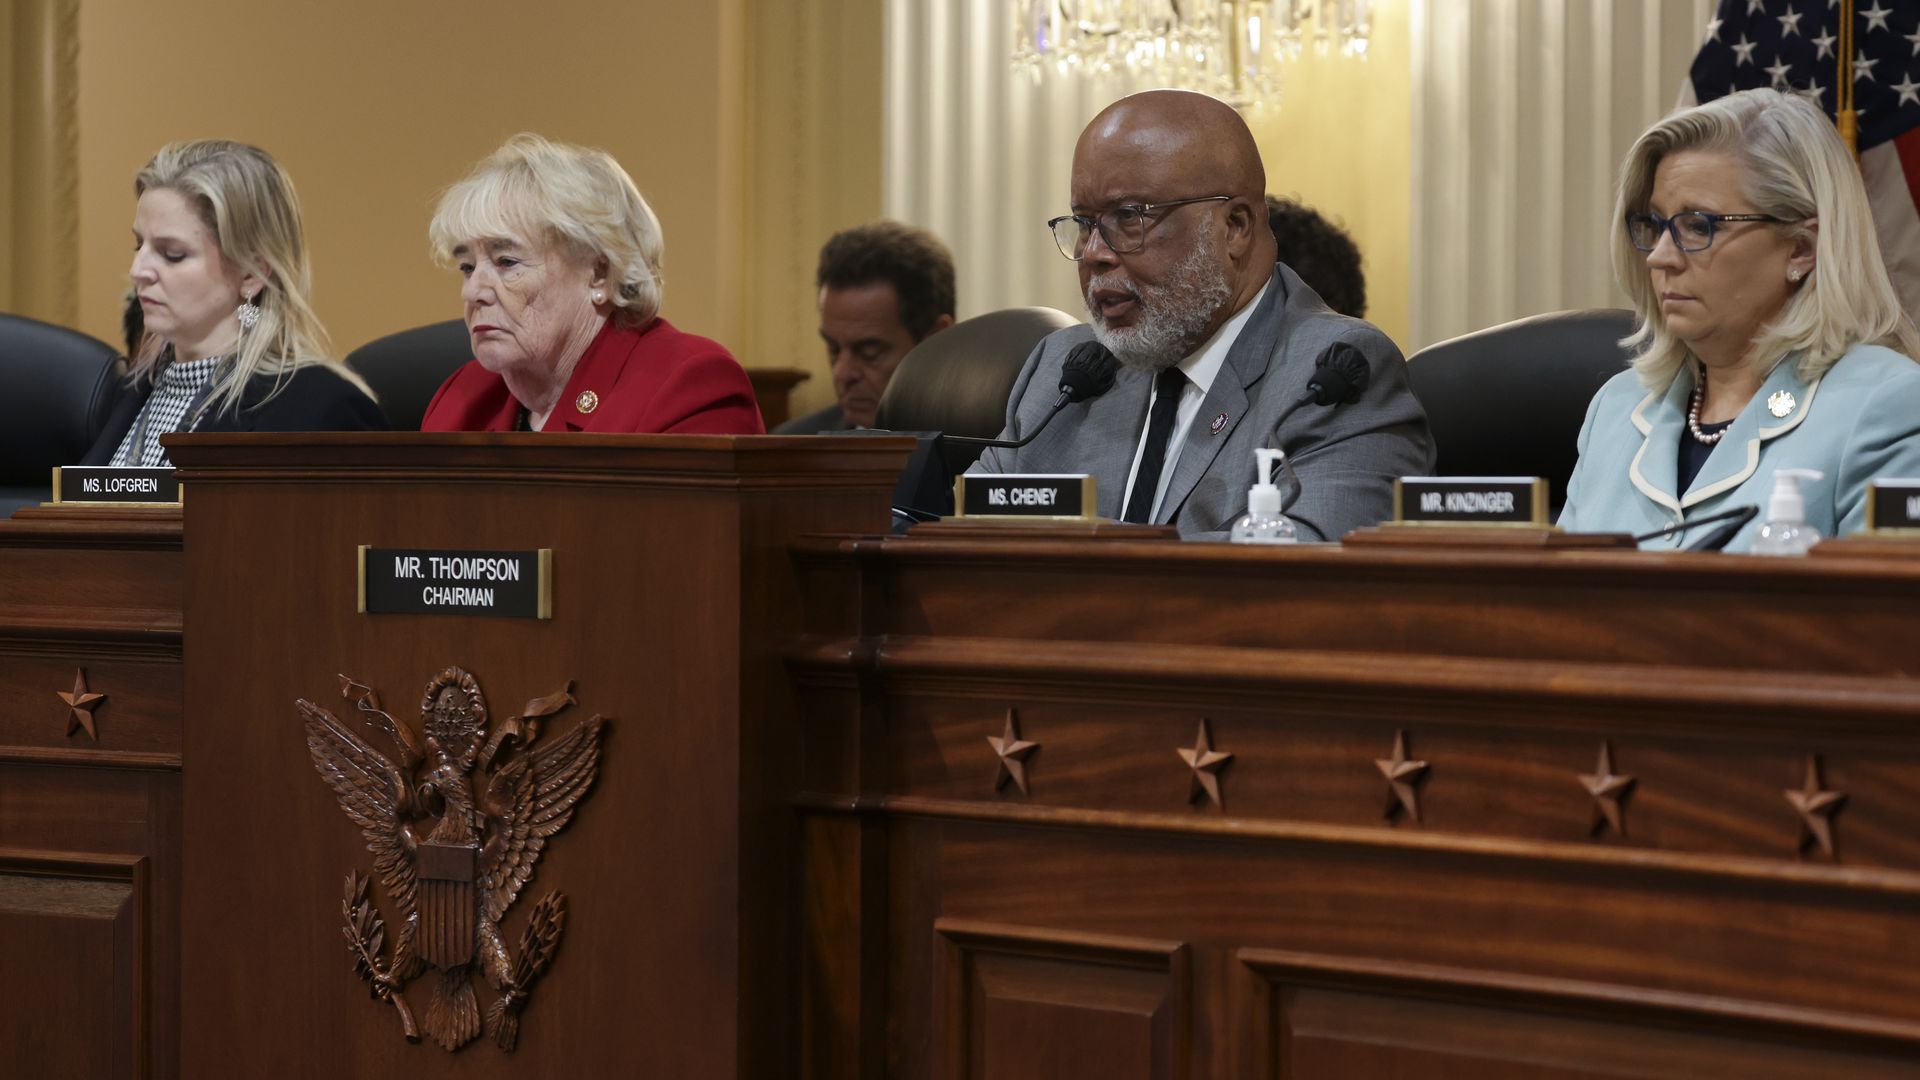 Reps. Zoe Lofgren, Bennie Thompson and Liz Cheney sit behind the dais at a Jan. 6 committee hearing.